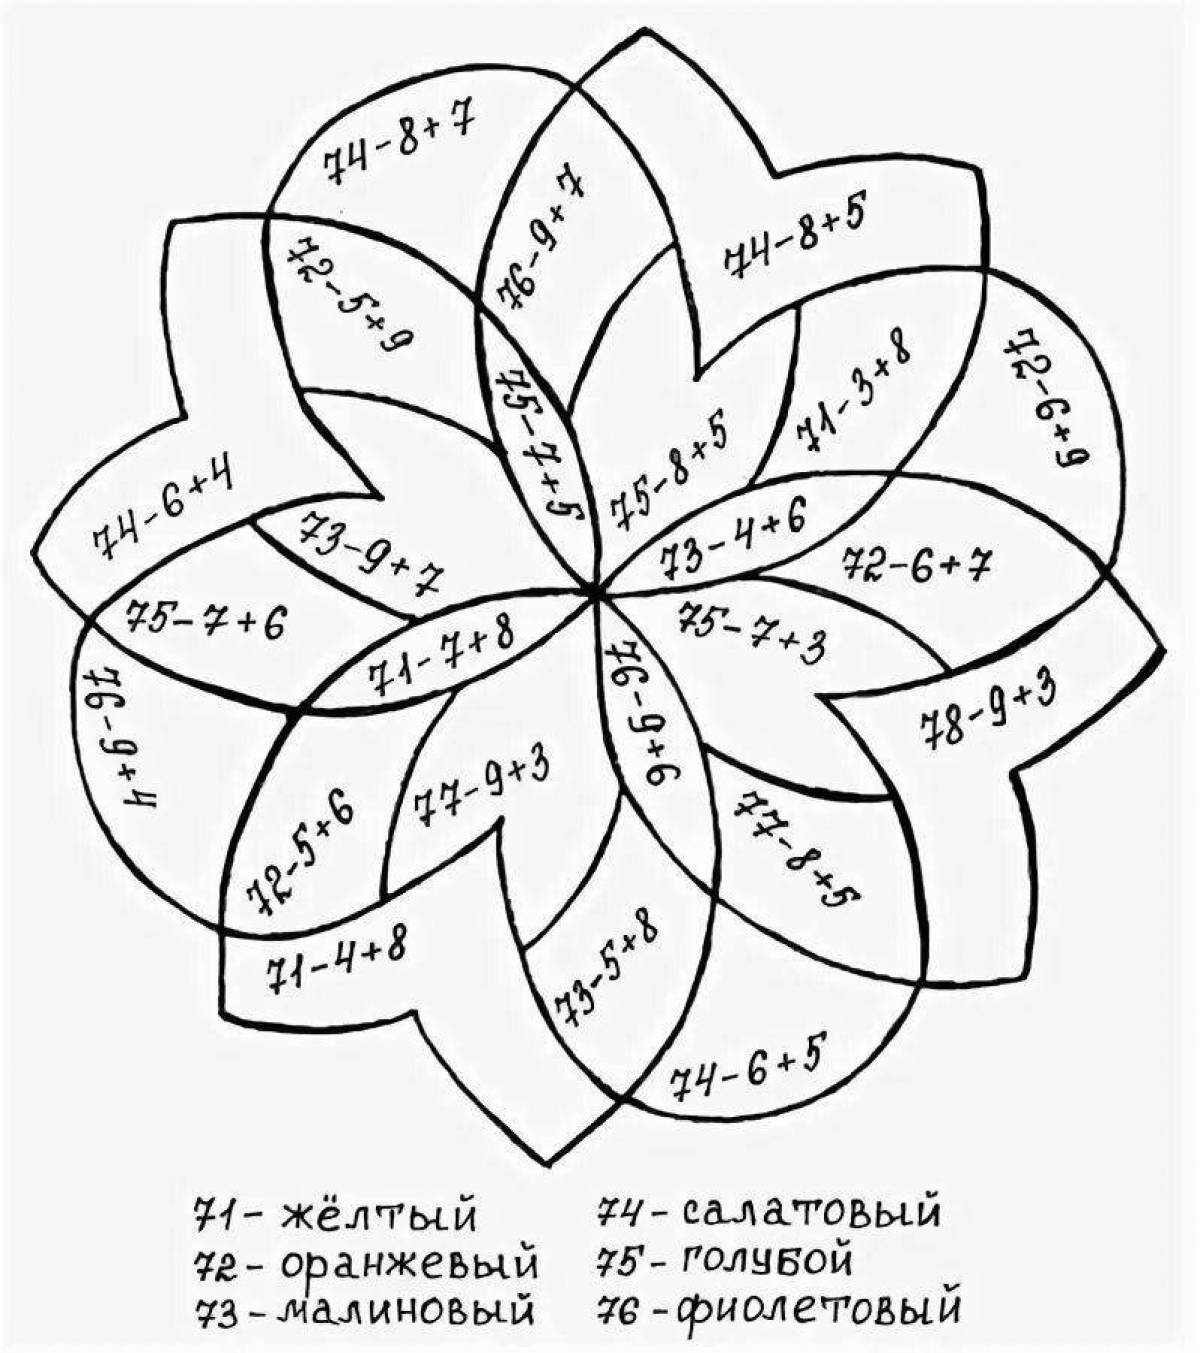 Detailed coloring of mathematical fractions